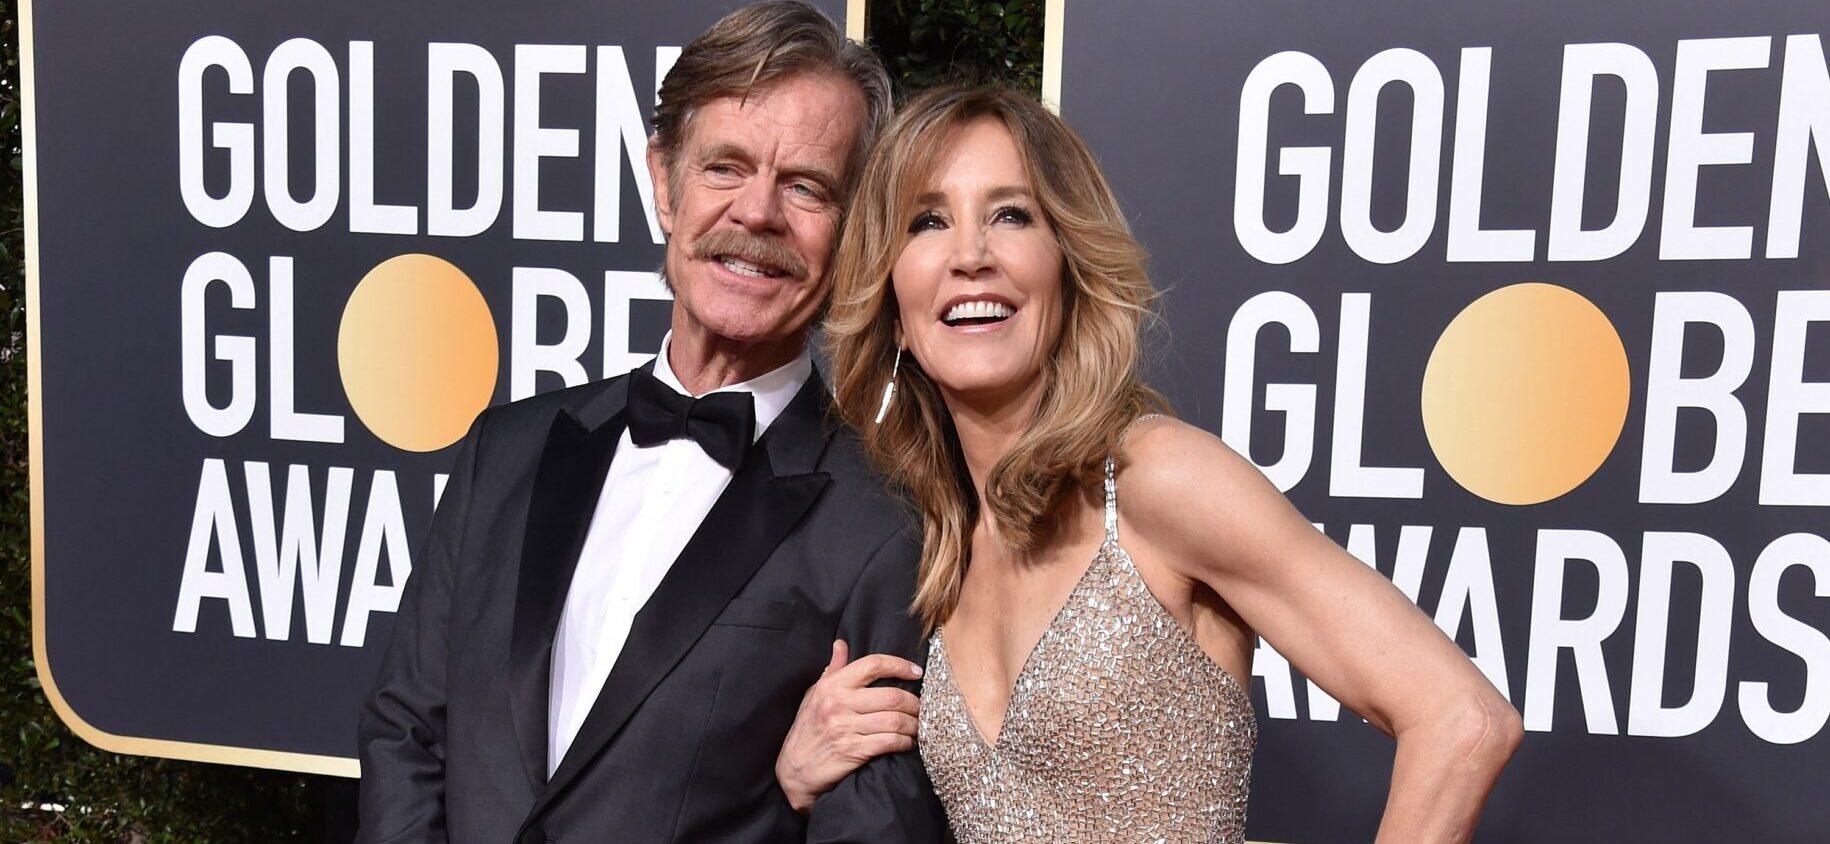 William H. Macy ‘Really Glad’ Wife Felicity Huffman Is Working Again